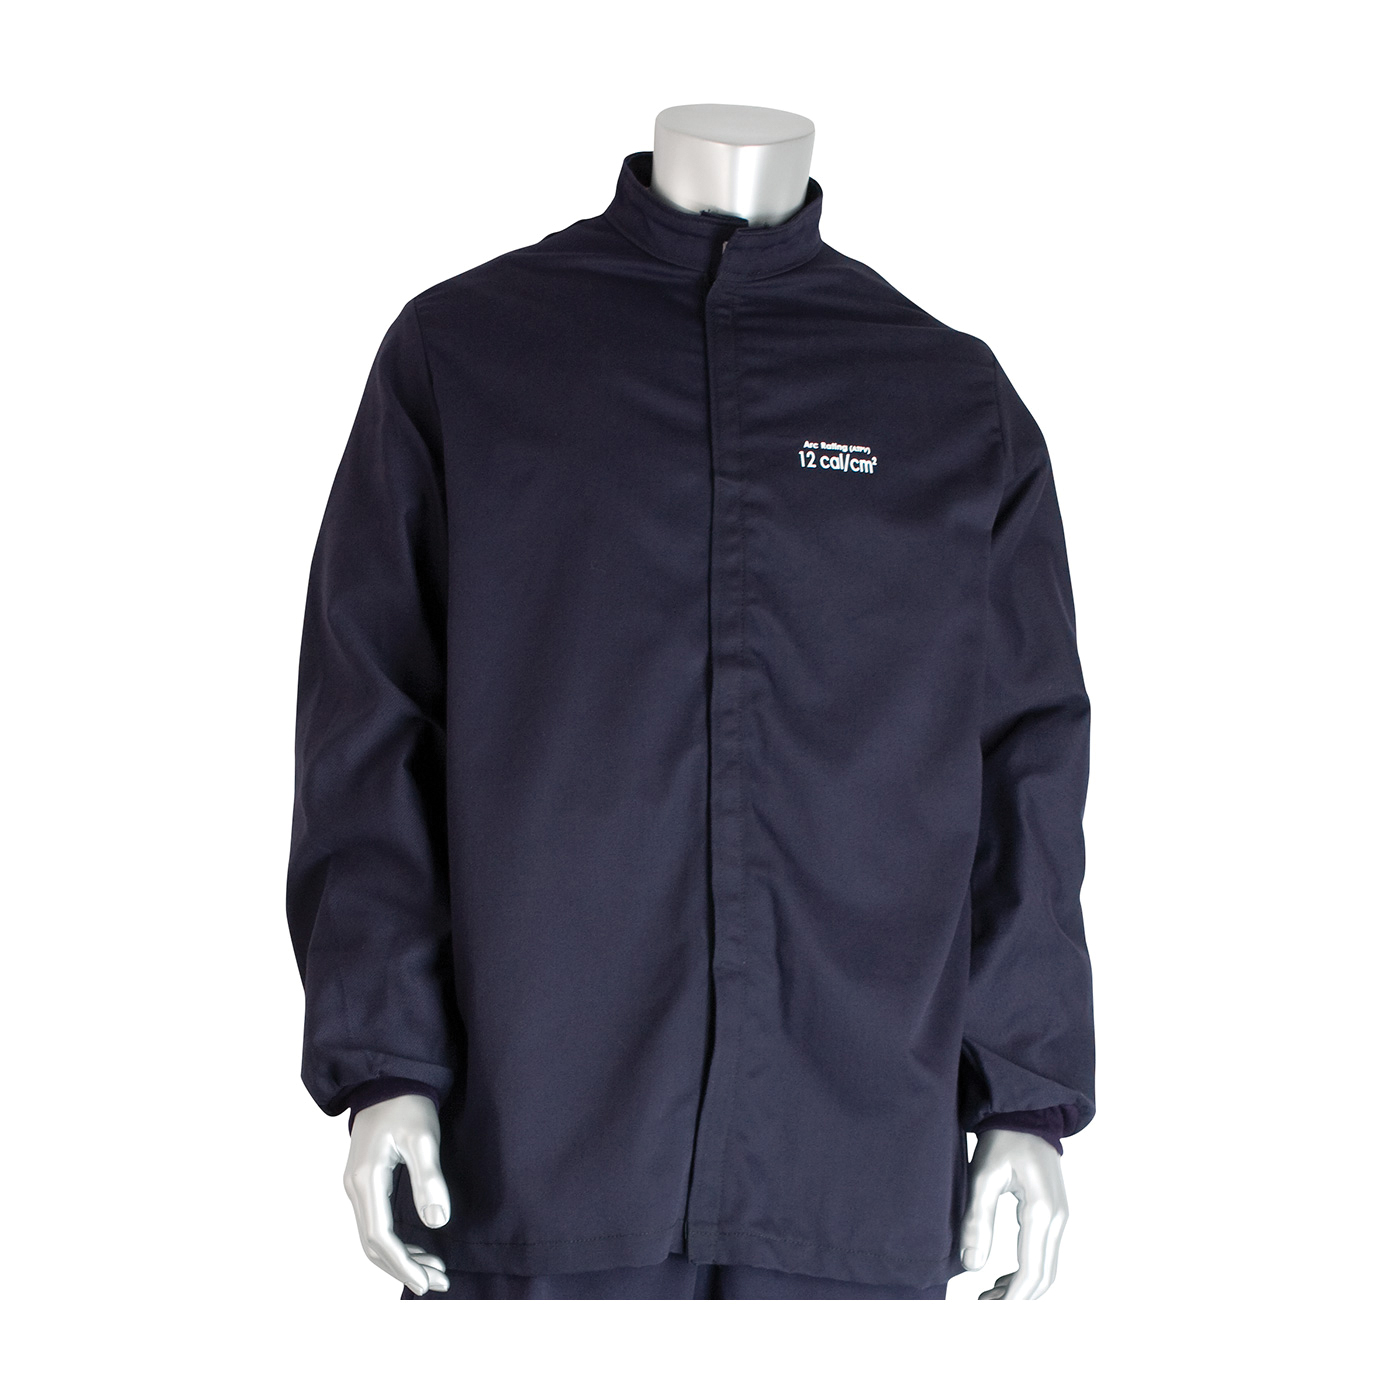 PIP® 9100-21782/M Arc and Flame Resistant Jacket, M, Navy, Westex® UltraSoft® 88% Cotton 12% High Tenacity Nylon, 40 to 42 in Chest, Resists: Arc and Flame, ASTM F1506-10a, ASTM F2178-12